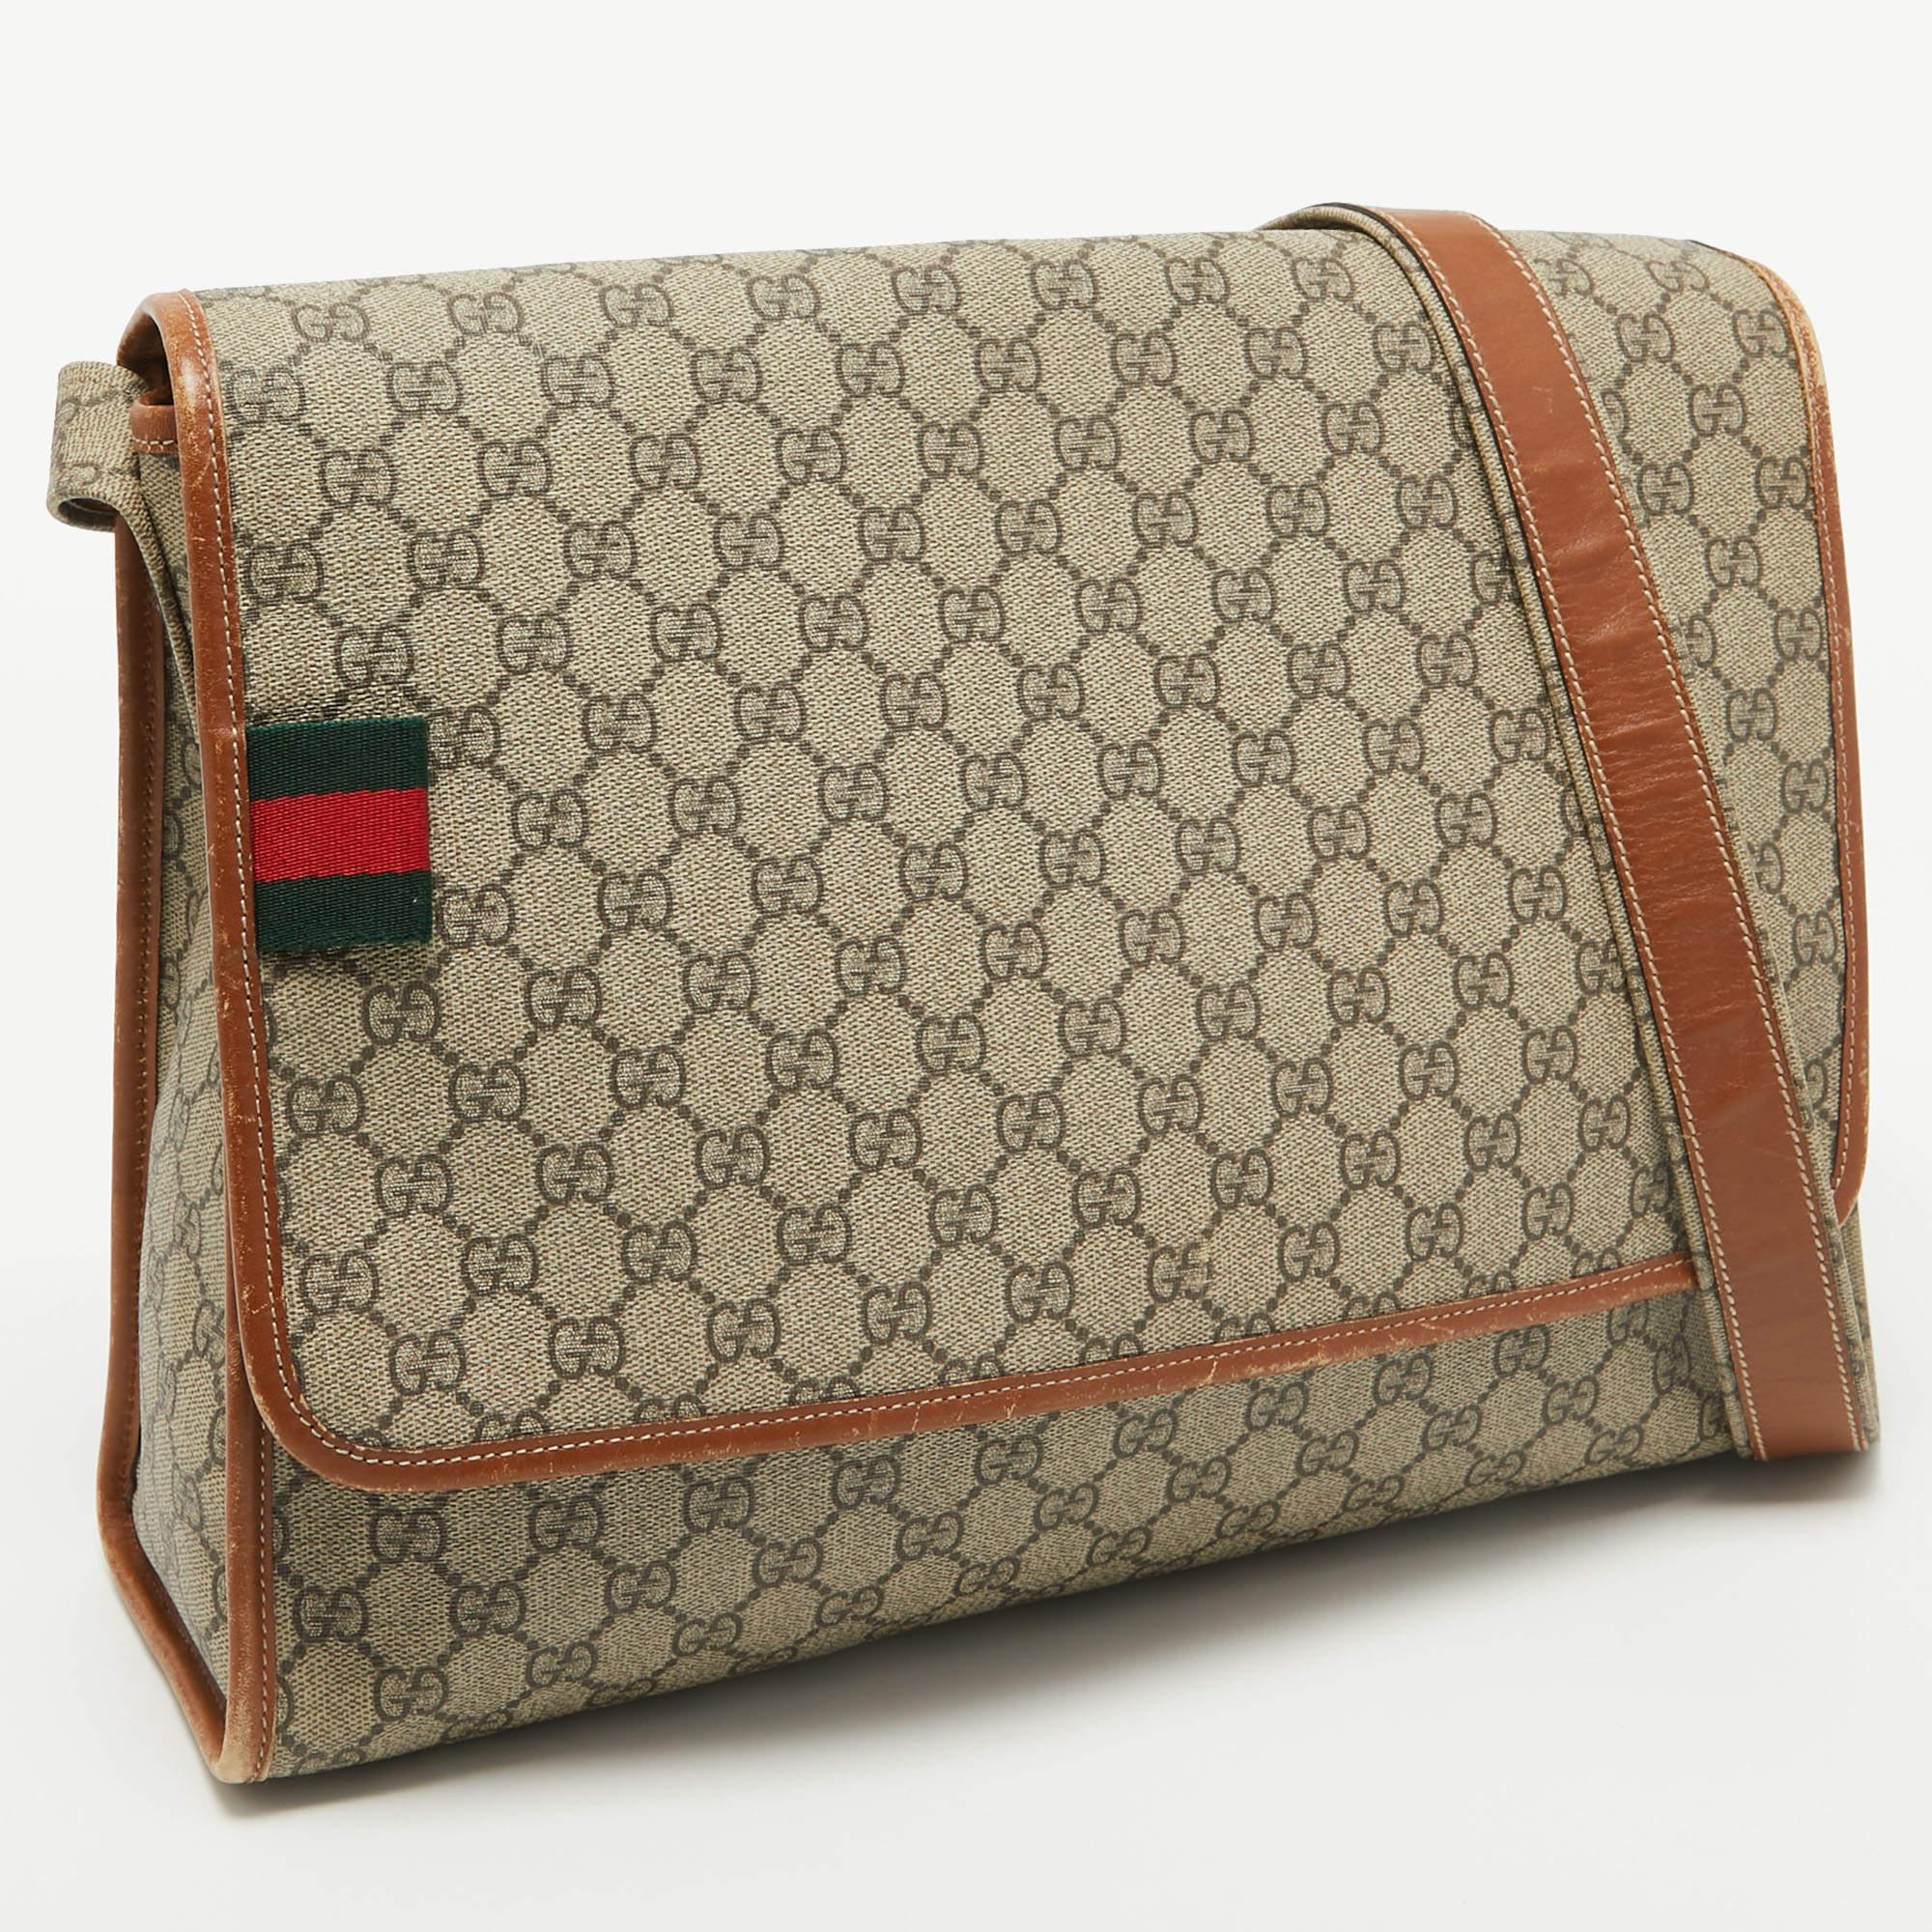 Gucci Beige/Brown GG Supreme Canvas And Leather Messenger Bag 5